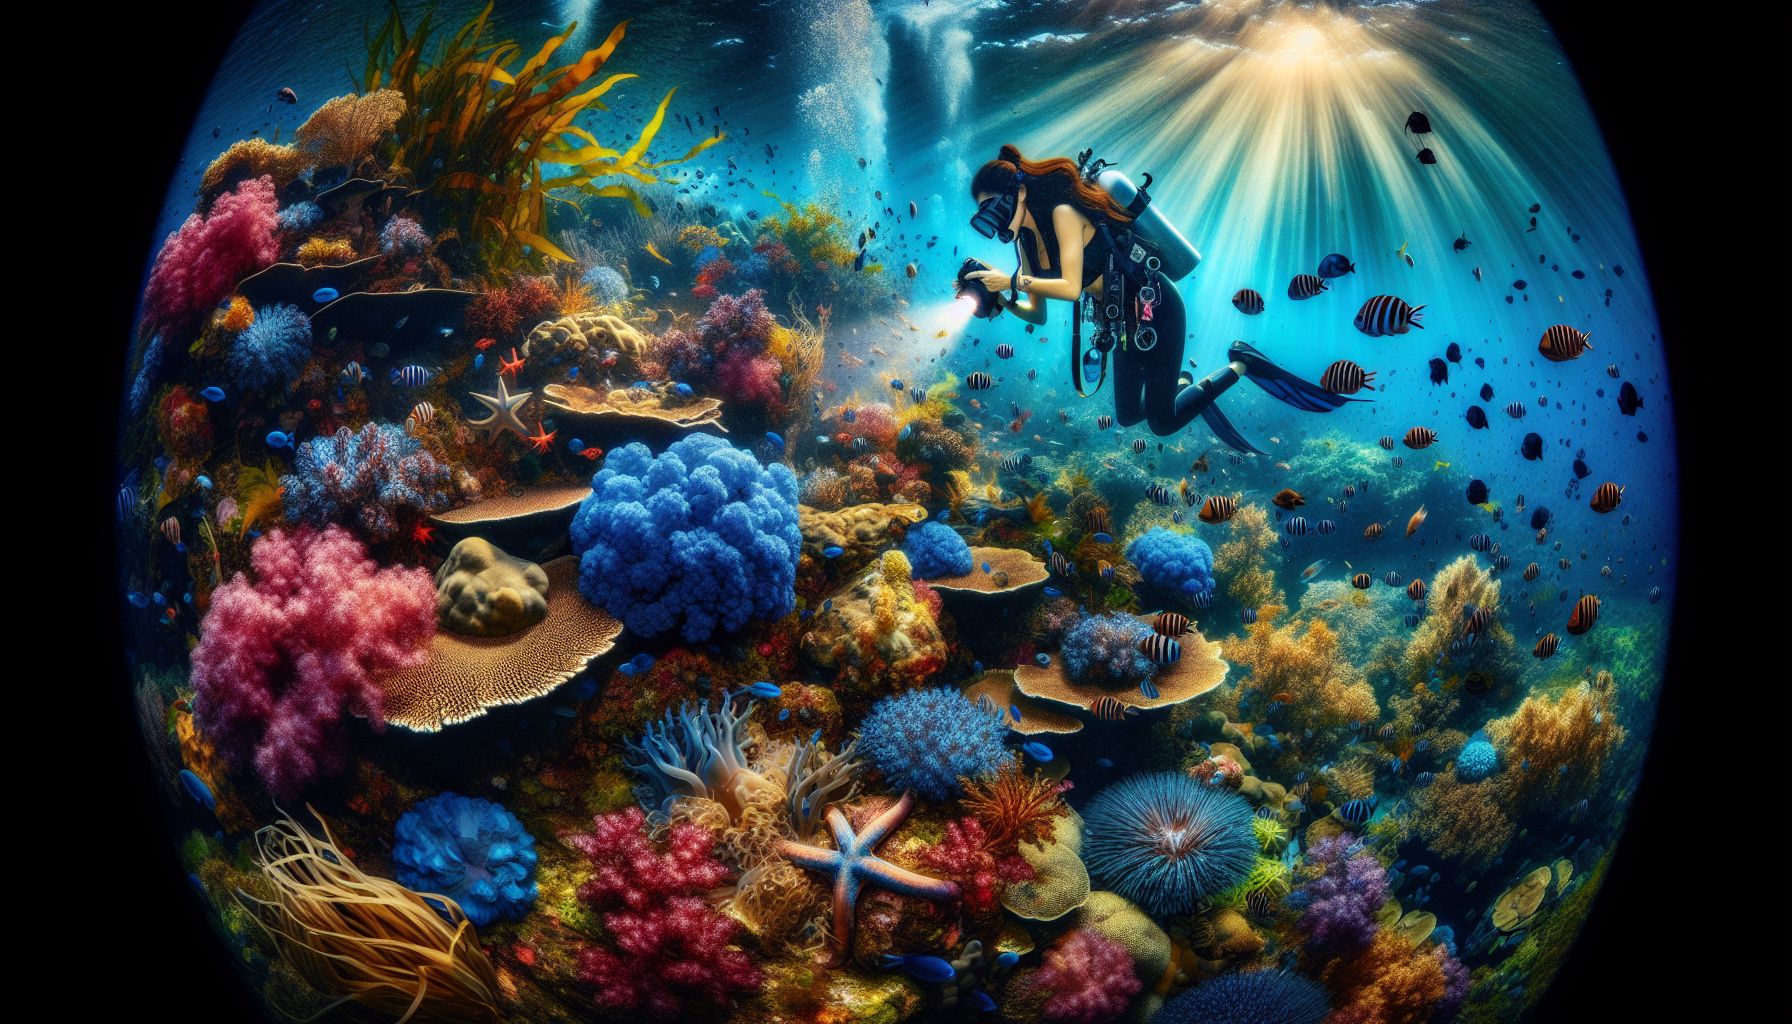 The Enthralling World of Underwater Photography